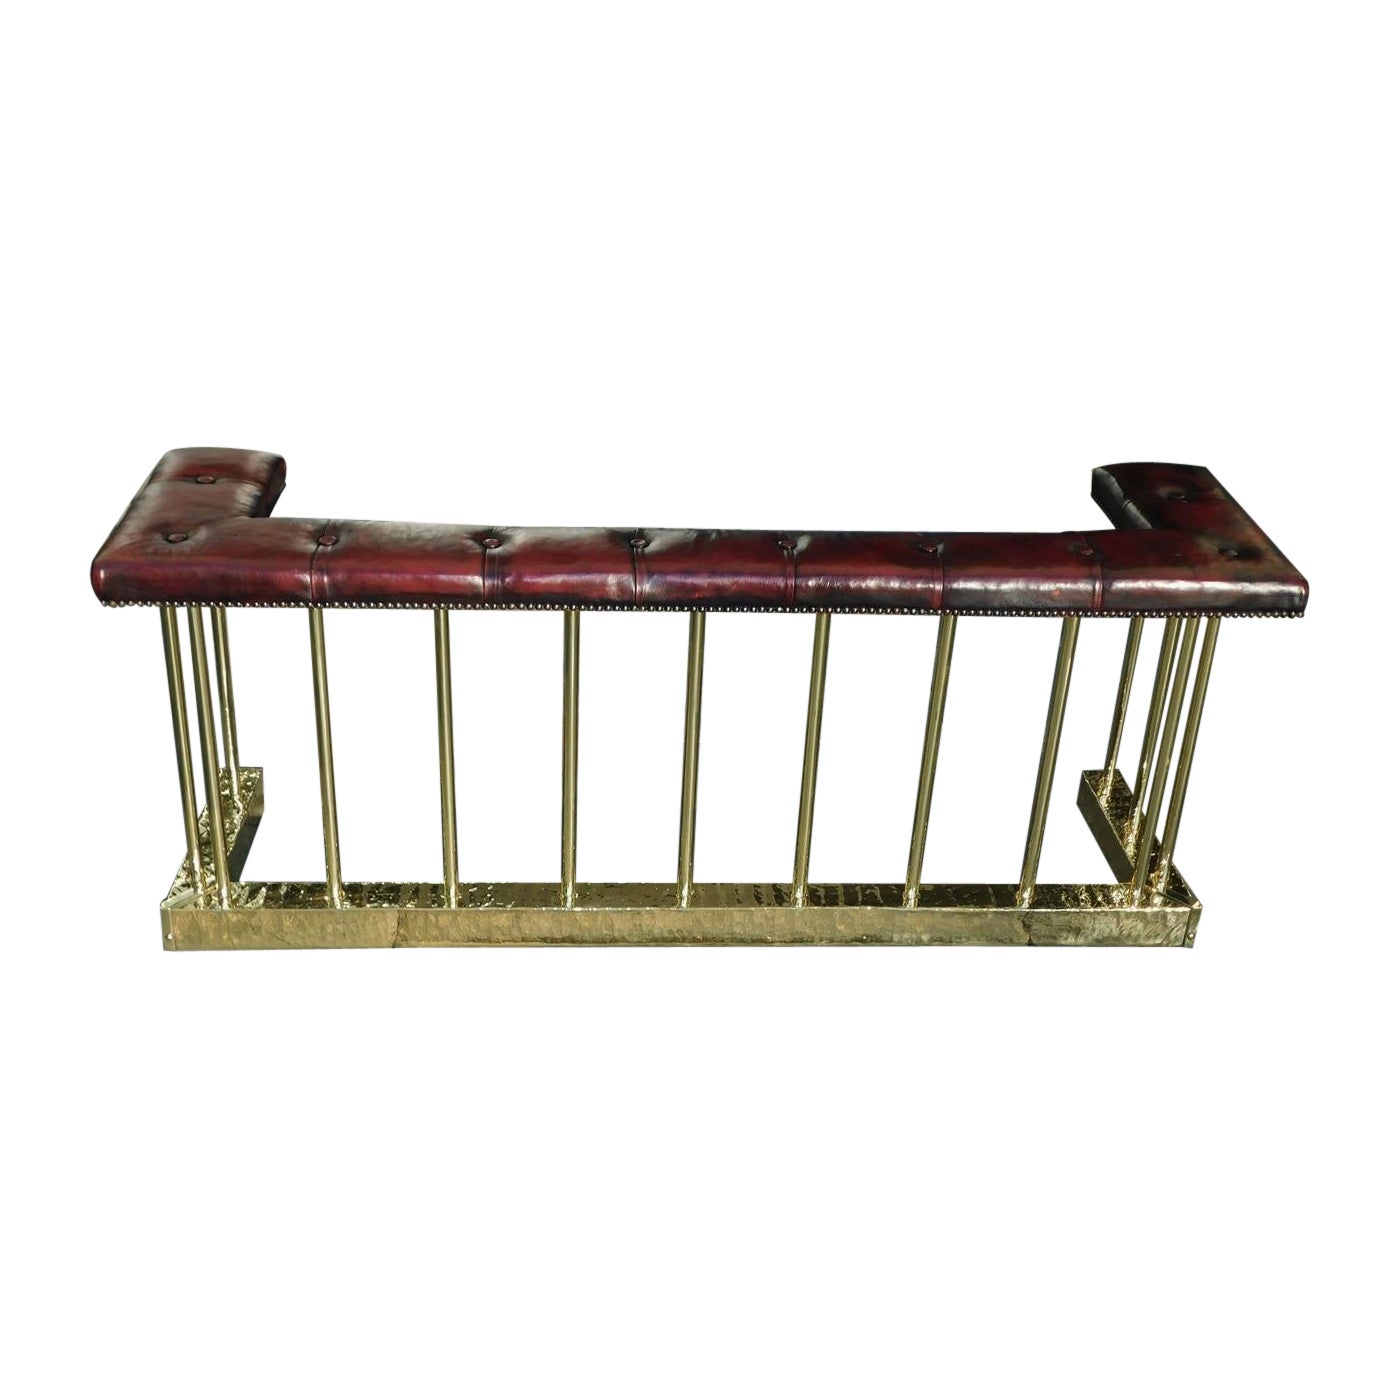 English Brass Gallery and Leather Tufted Club Fire Place Fender, Circa 1830 For Sale